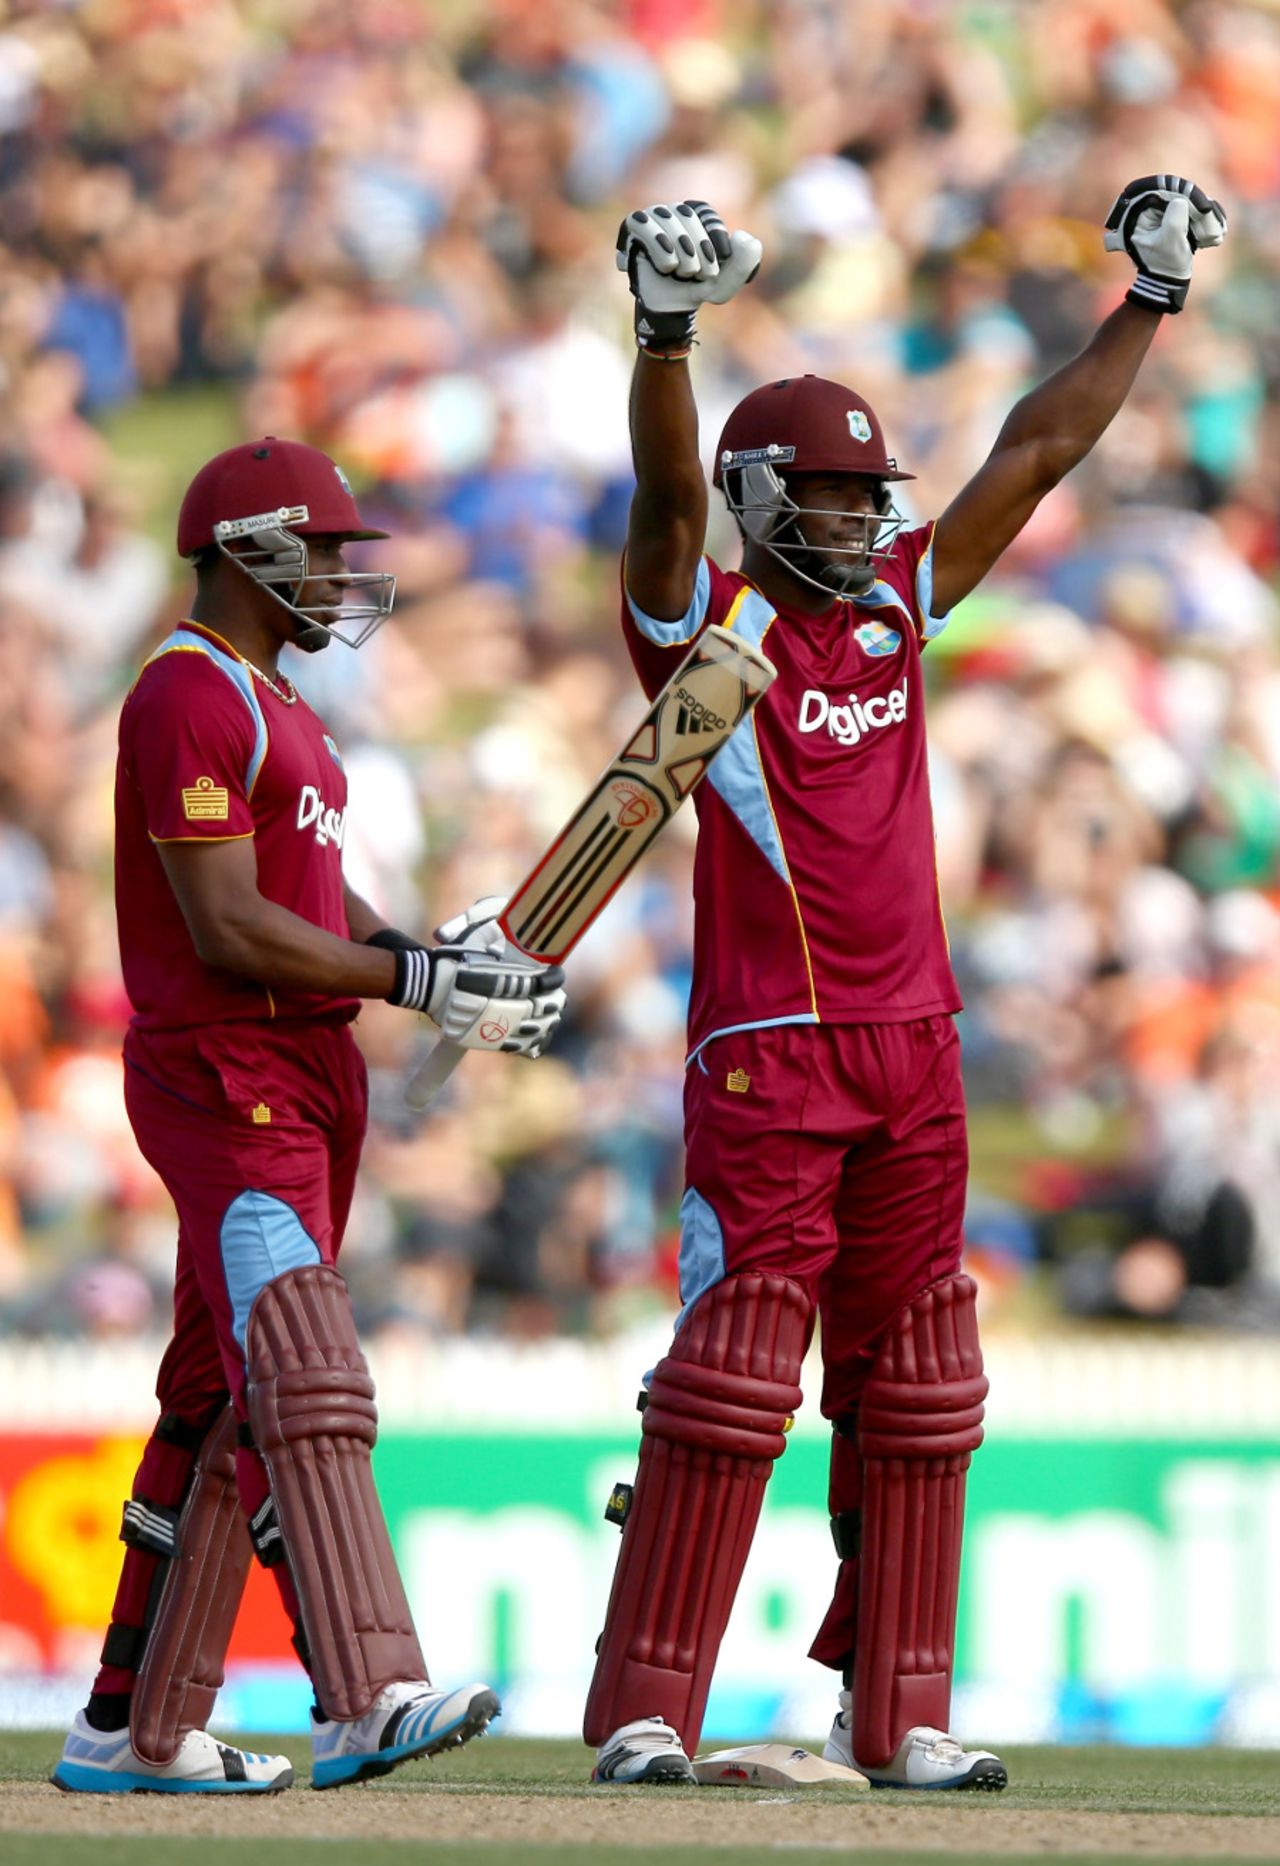 Kirk Edwards raises his arms - but not his bat - after reaching a hundred, New Zealand v West Indies, 5th ODI, Hamilton, January 8, 2013